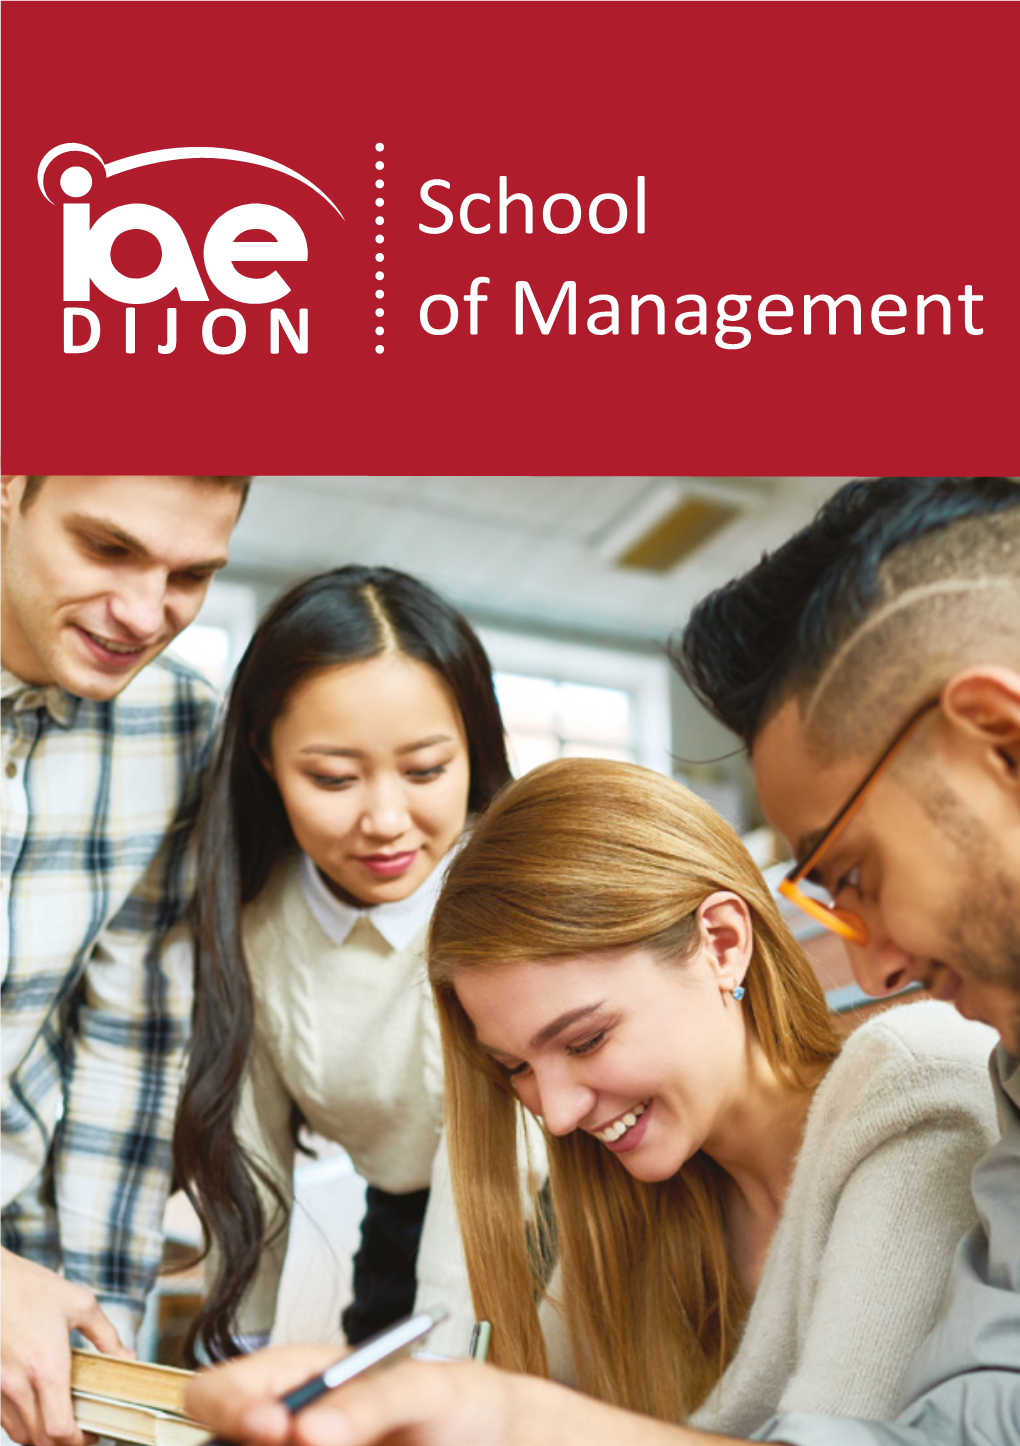 School of Management Is Part of the University of Burgundy, Located in the City of Dijon with an Exceptional Campus